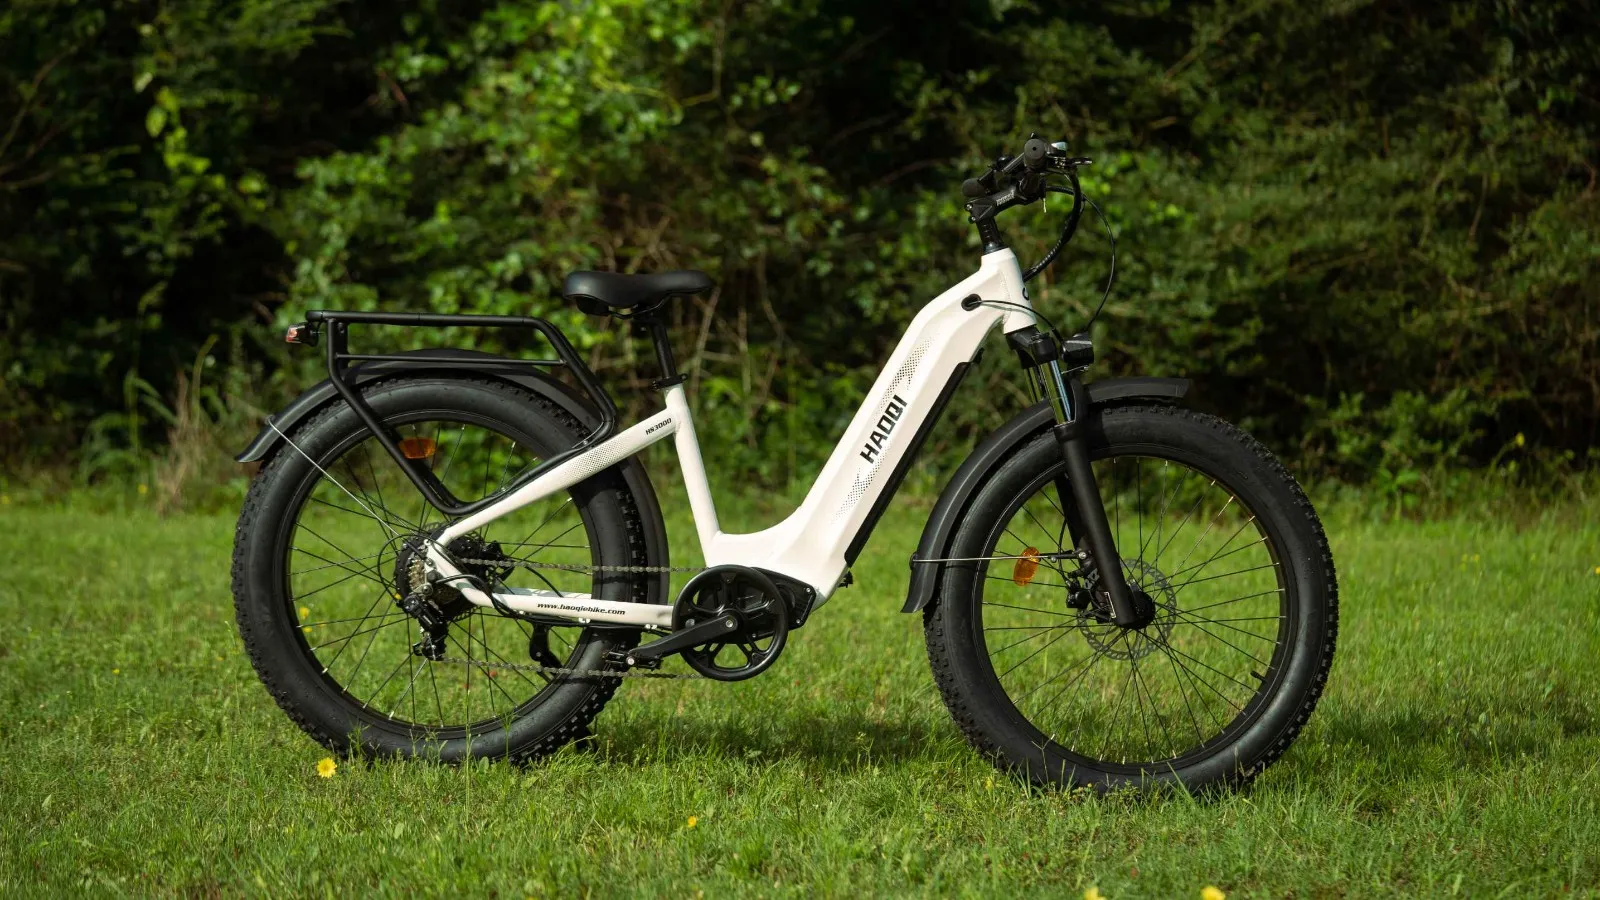 HAOQI Eagle Electric Bicycle Review – Complete Guide 2023